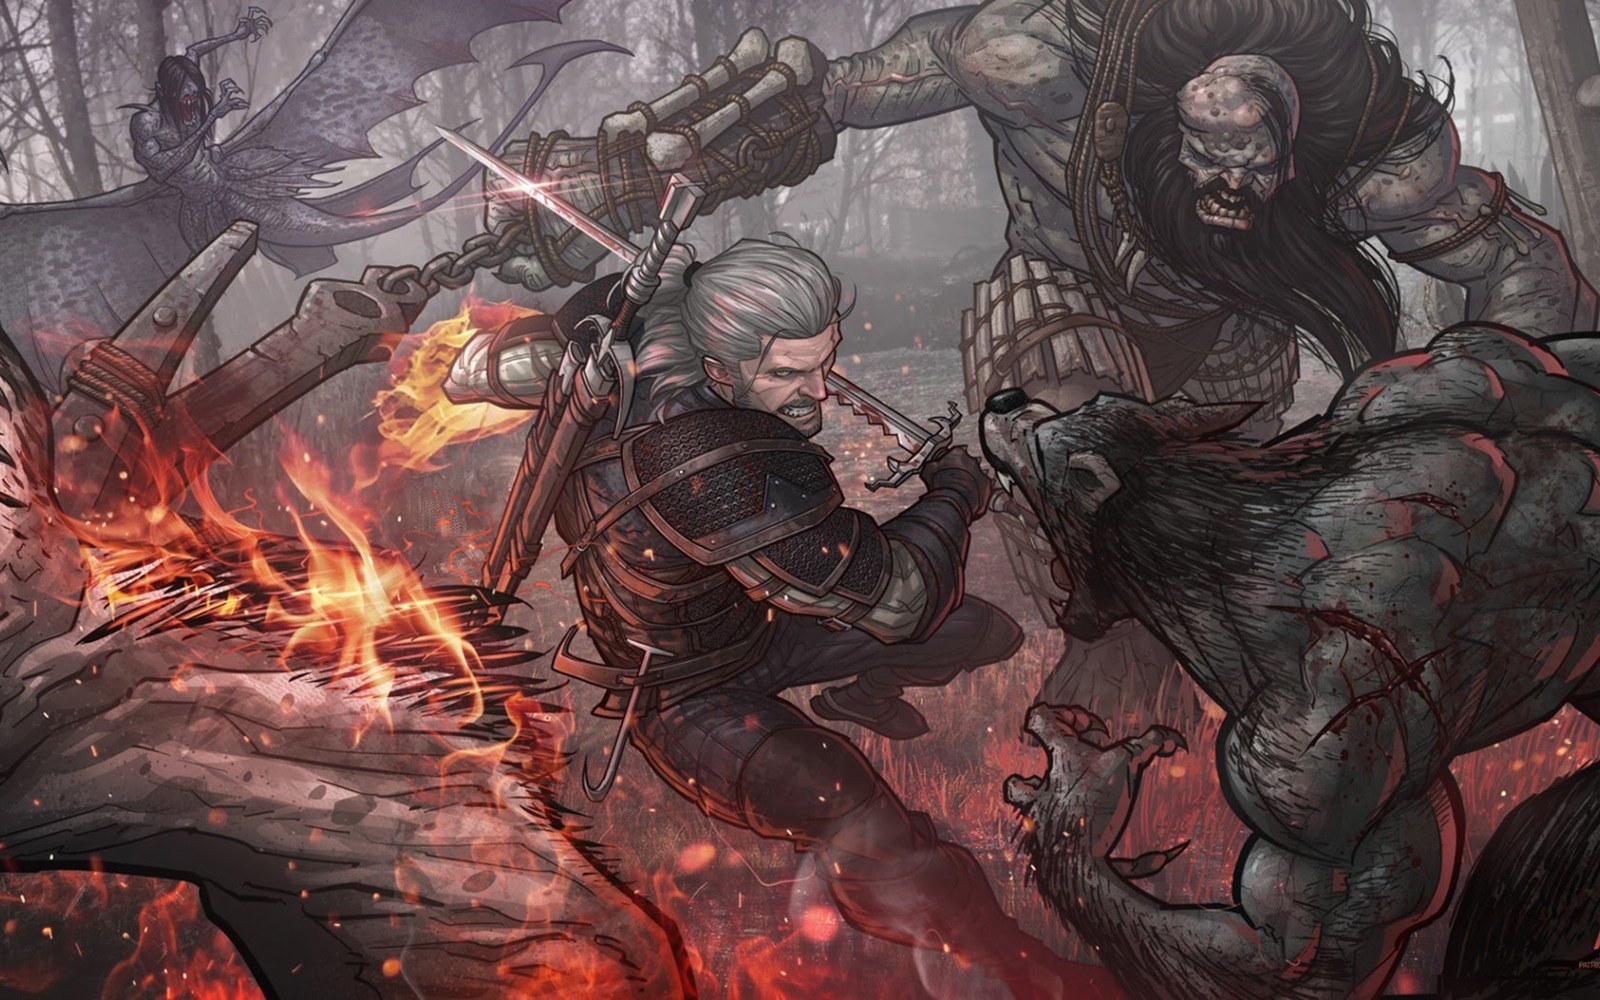 La, who would be cut - The Witcher 3: Wild Hunt, Witcher, , Geralt of Rivia